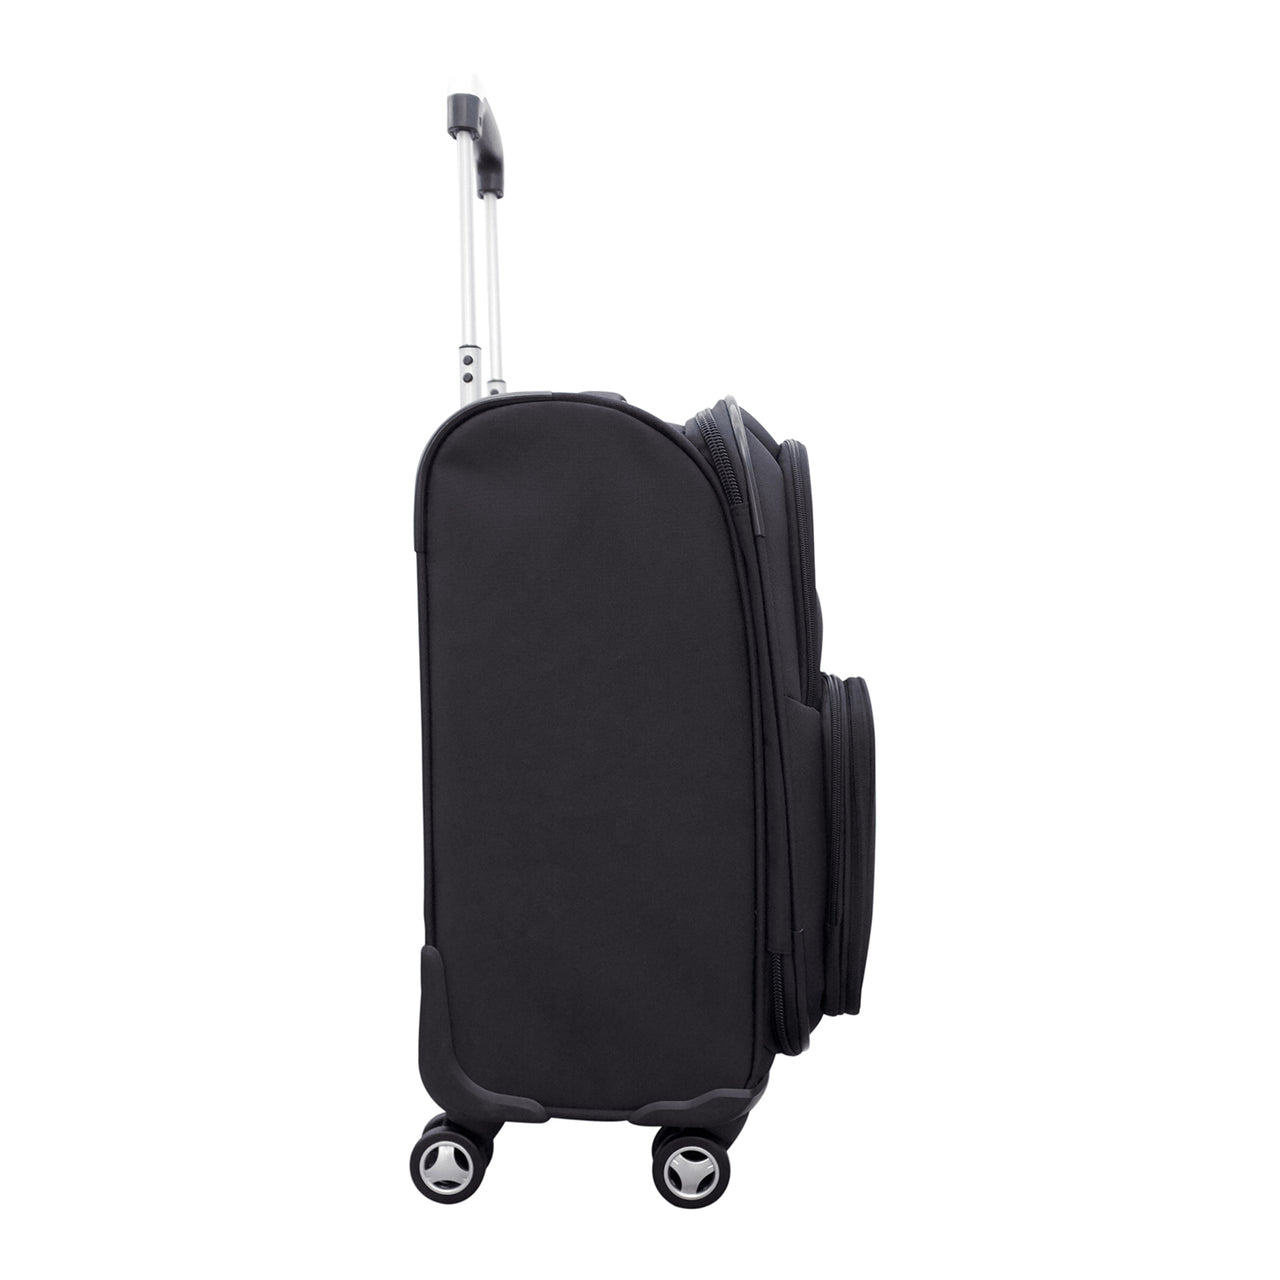 Giants Luggage | San Francisco Giants 21" Carry-on Spinner Luggage